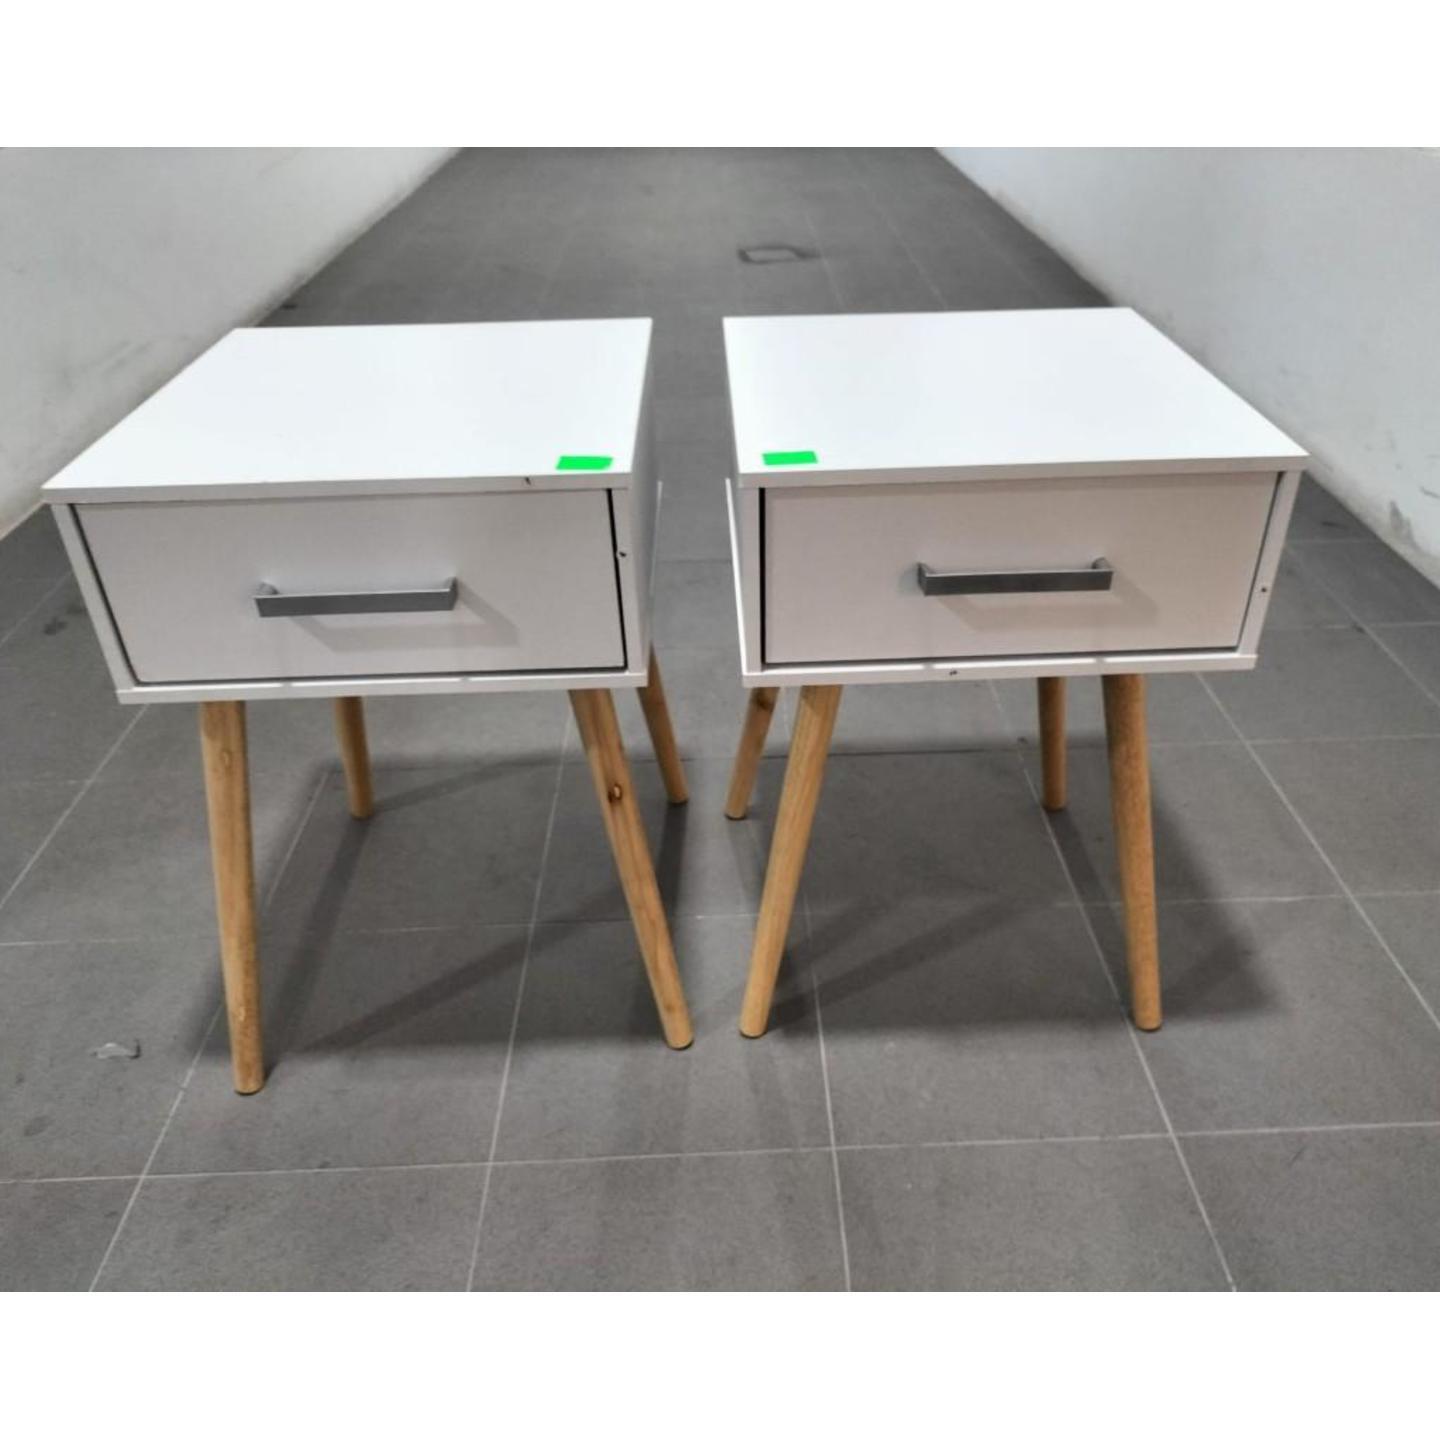 Pair of FERRIS Bedside Table in WHITE